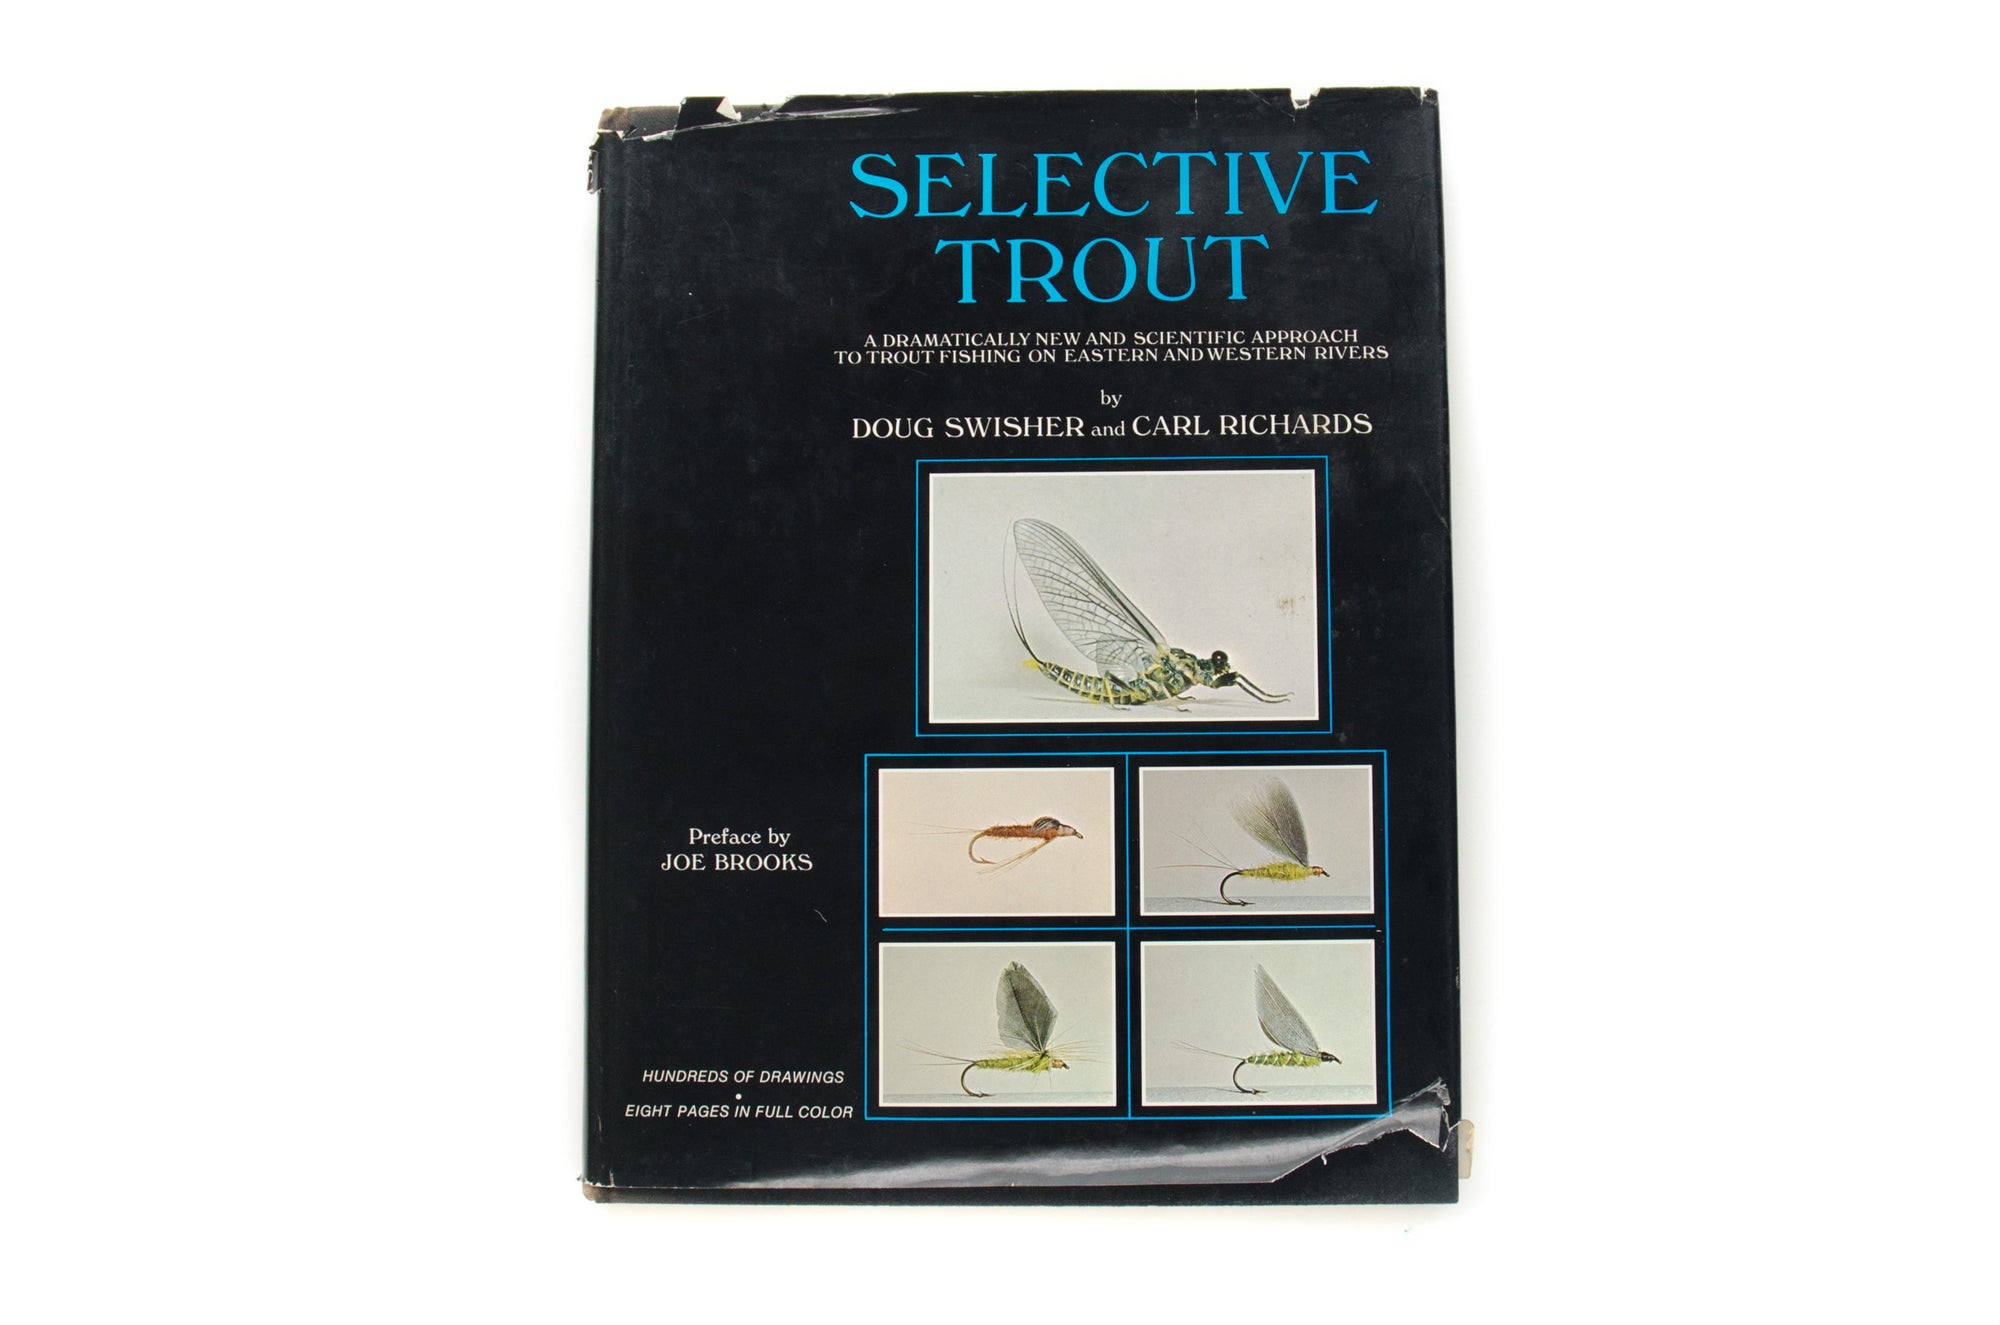 Selective Trout Book by Doug Swisher and Carl Richards